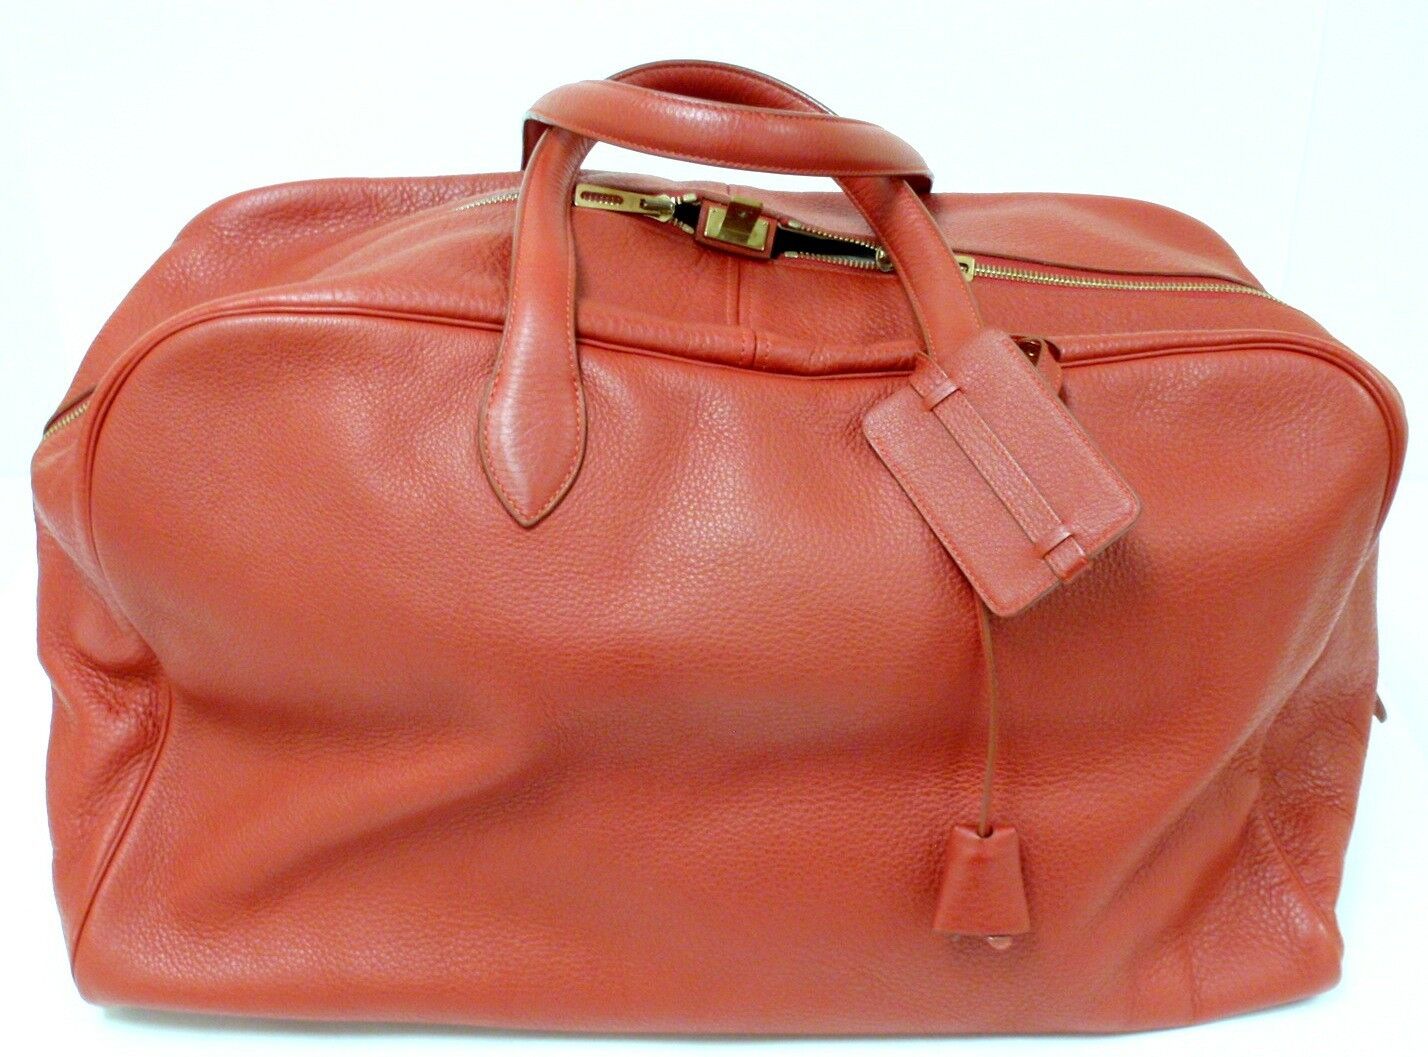 Hermes Victoria II Travel Bag Clemence 50 Red 21548250